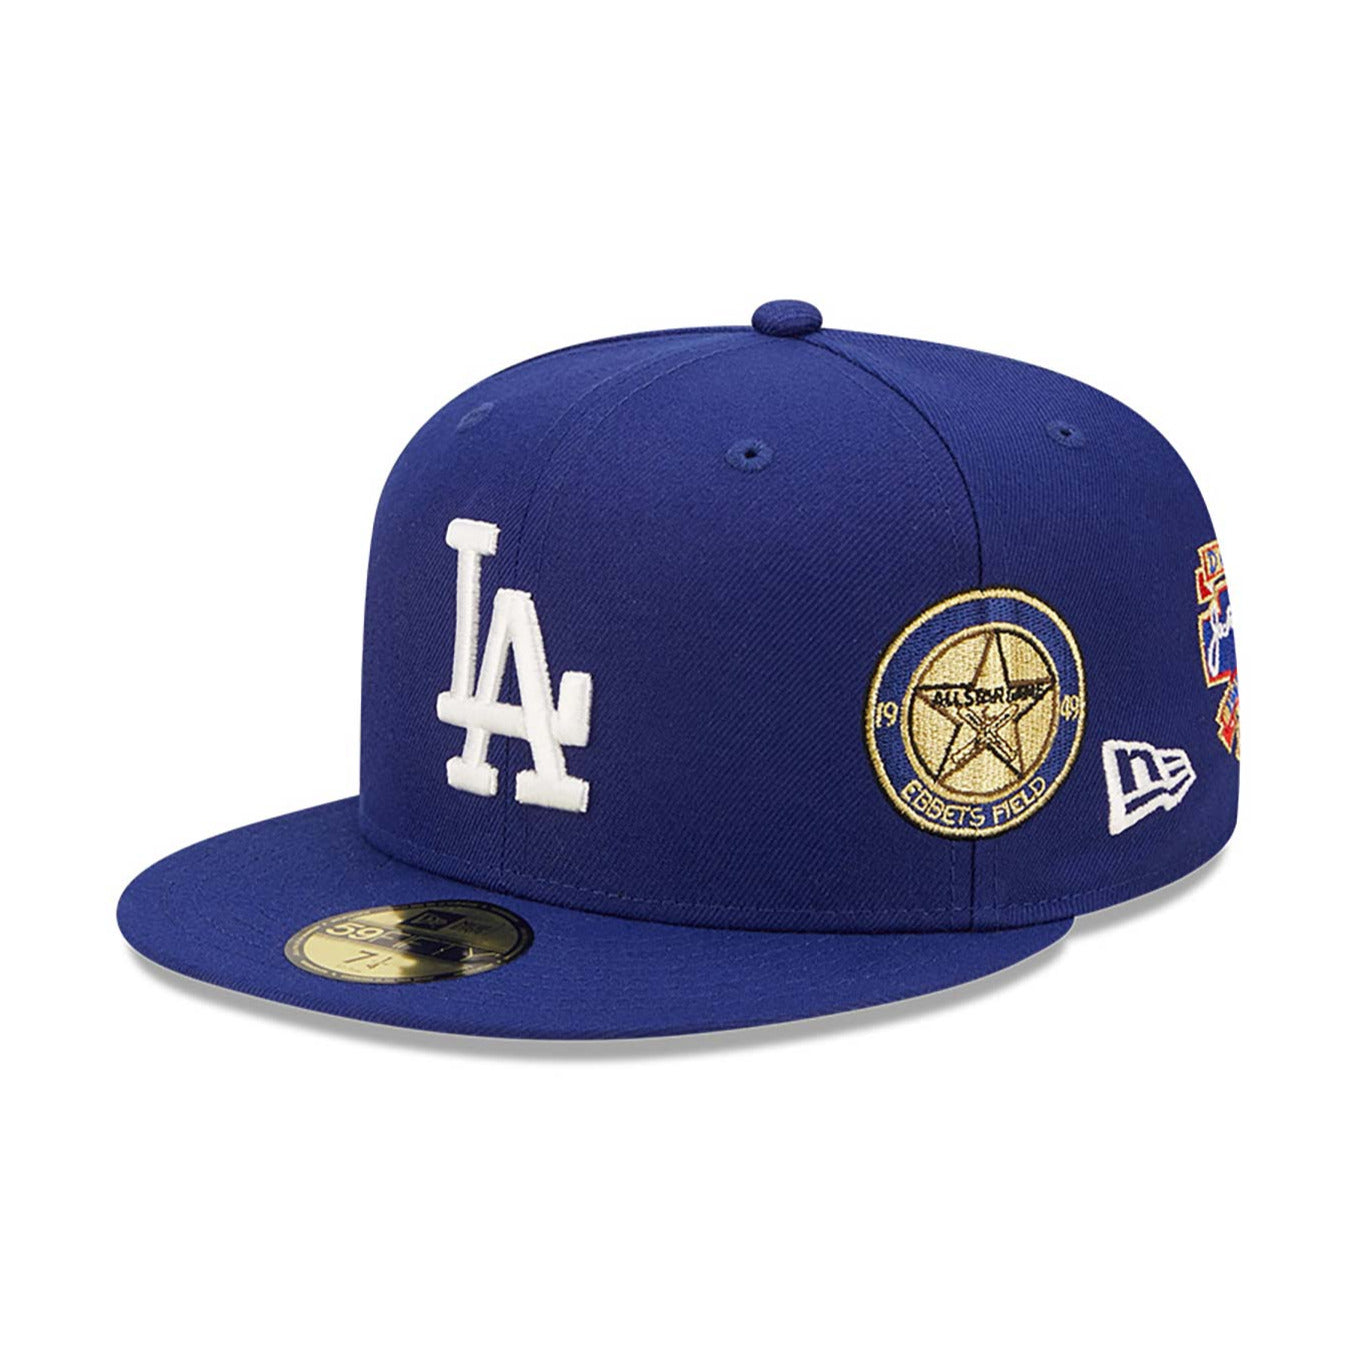 NEW ERA 59FIFTY MLB COOPS MULTI PATCH LOS ANGELES DODGERS BLUE FITTED CAP